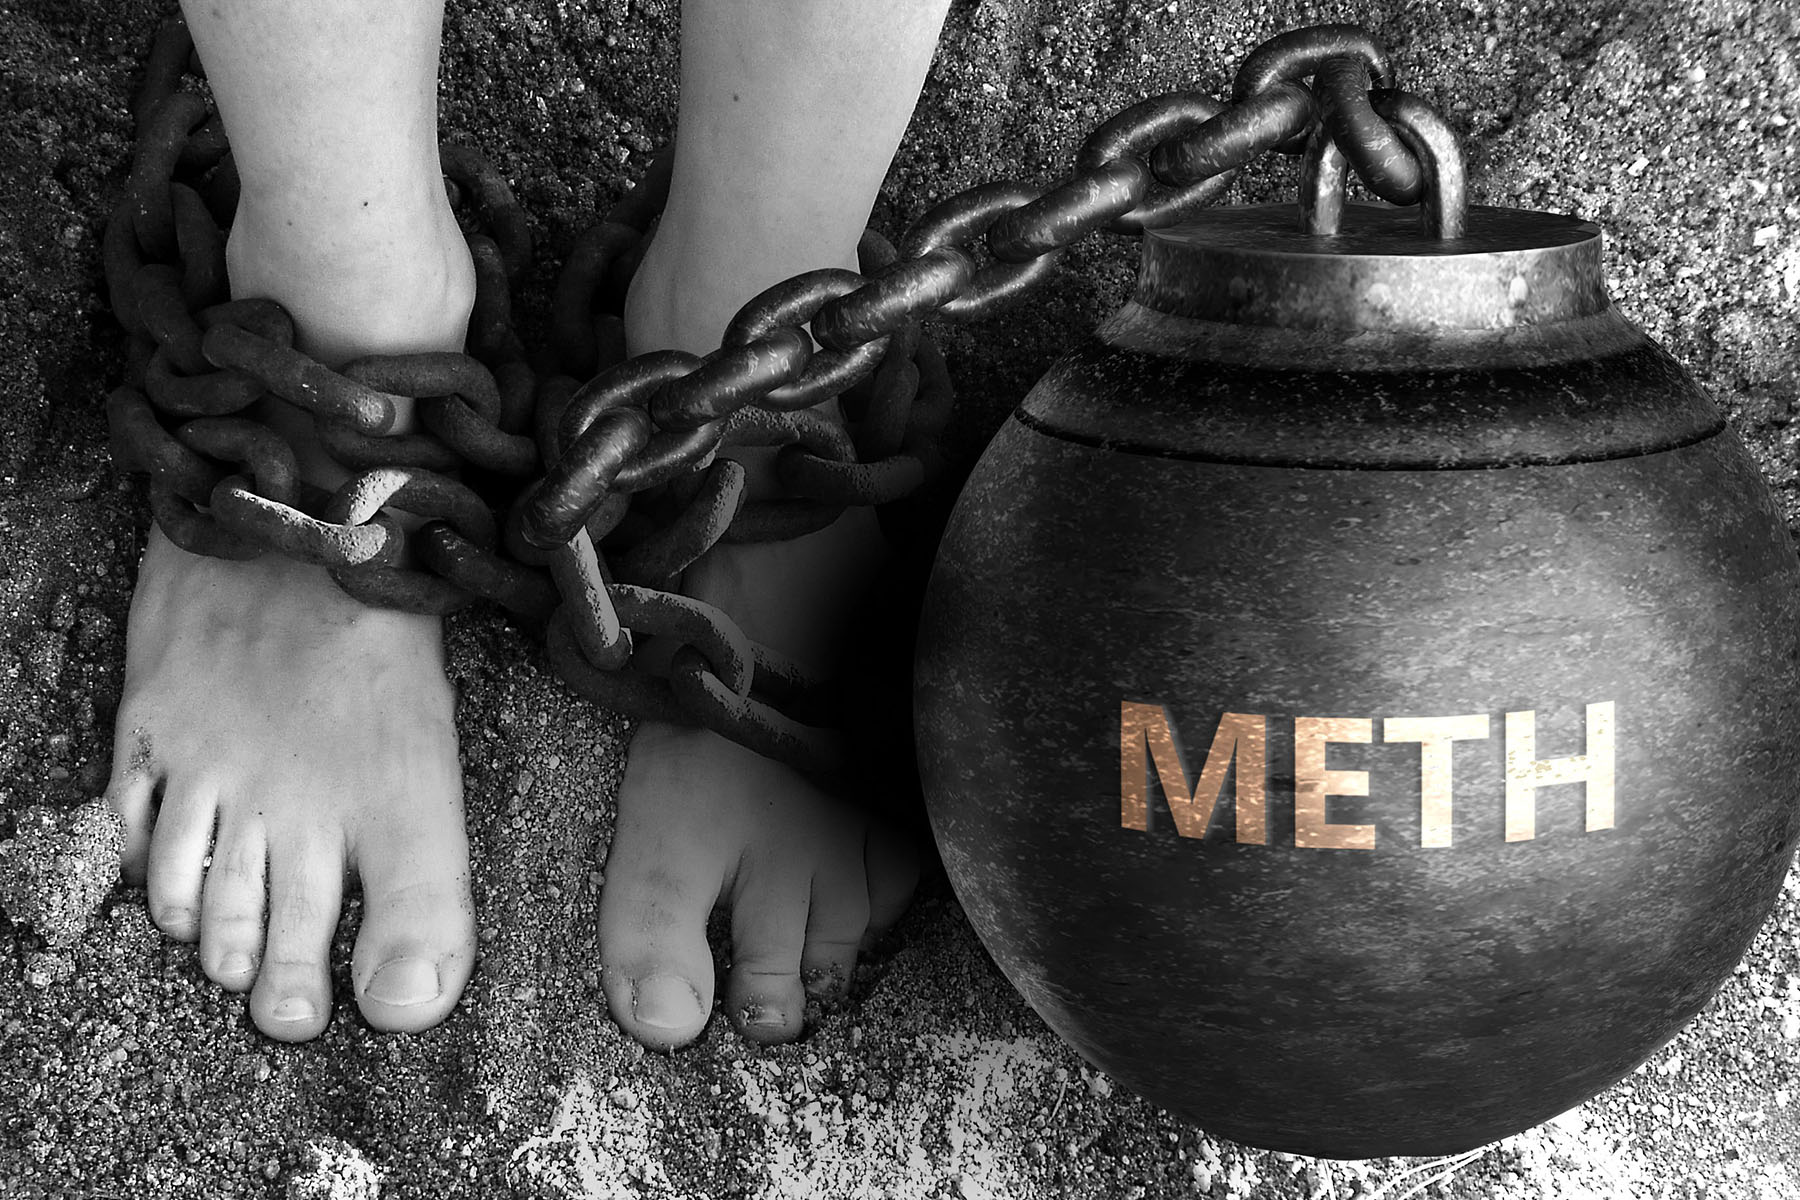 The Penal Consequences of Meth Possession